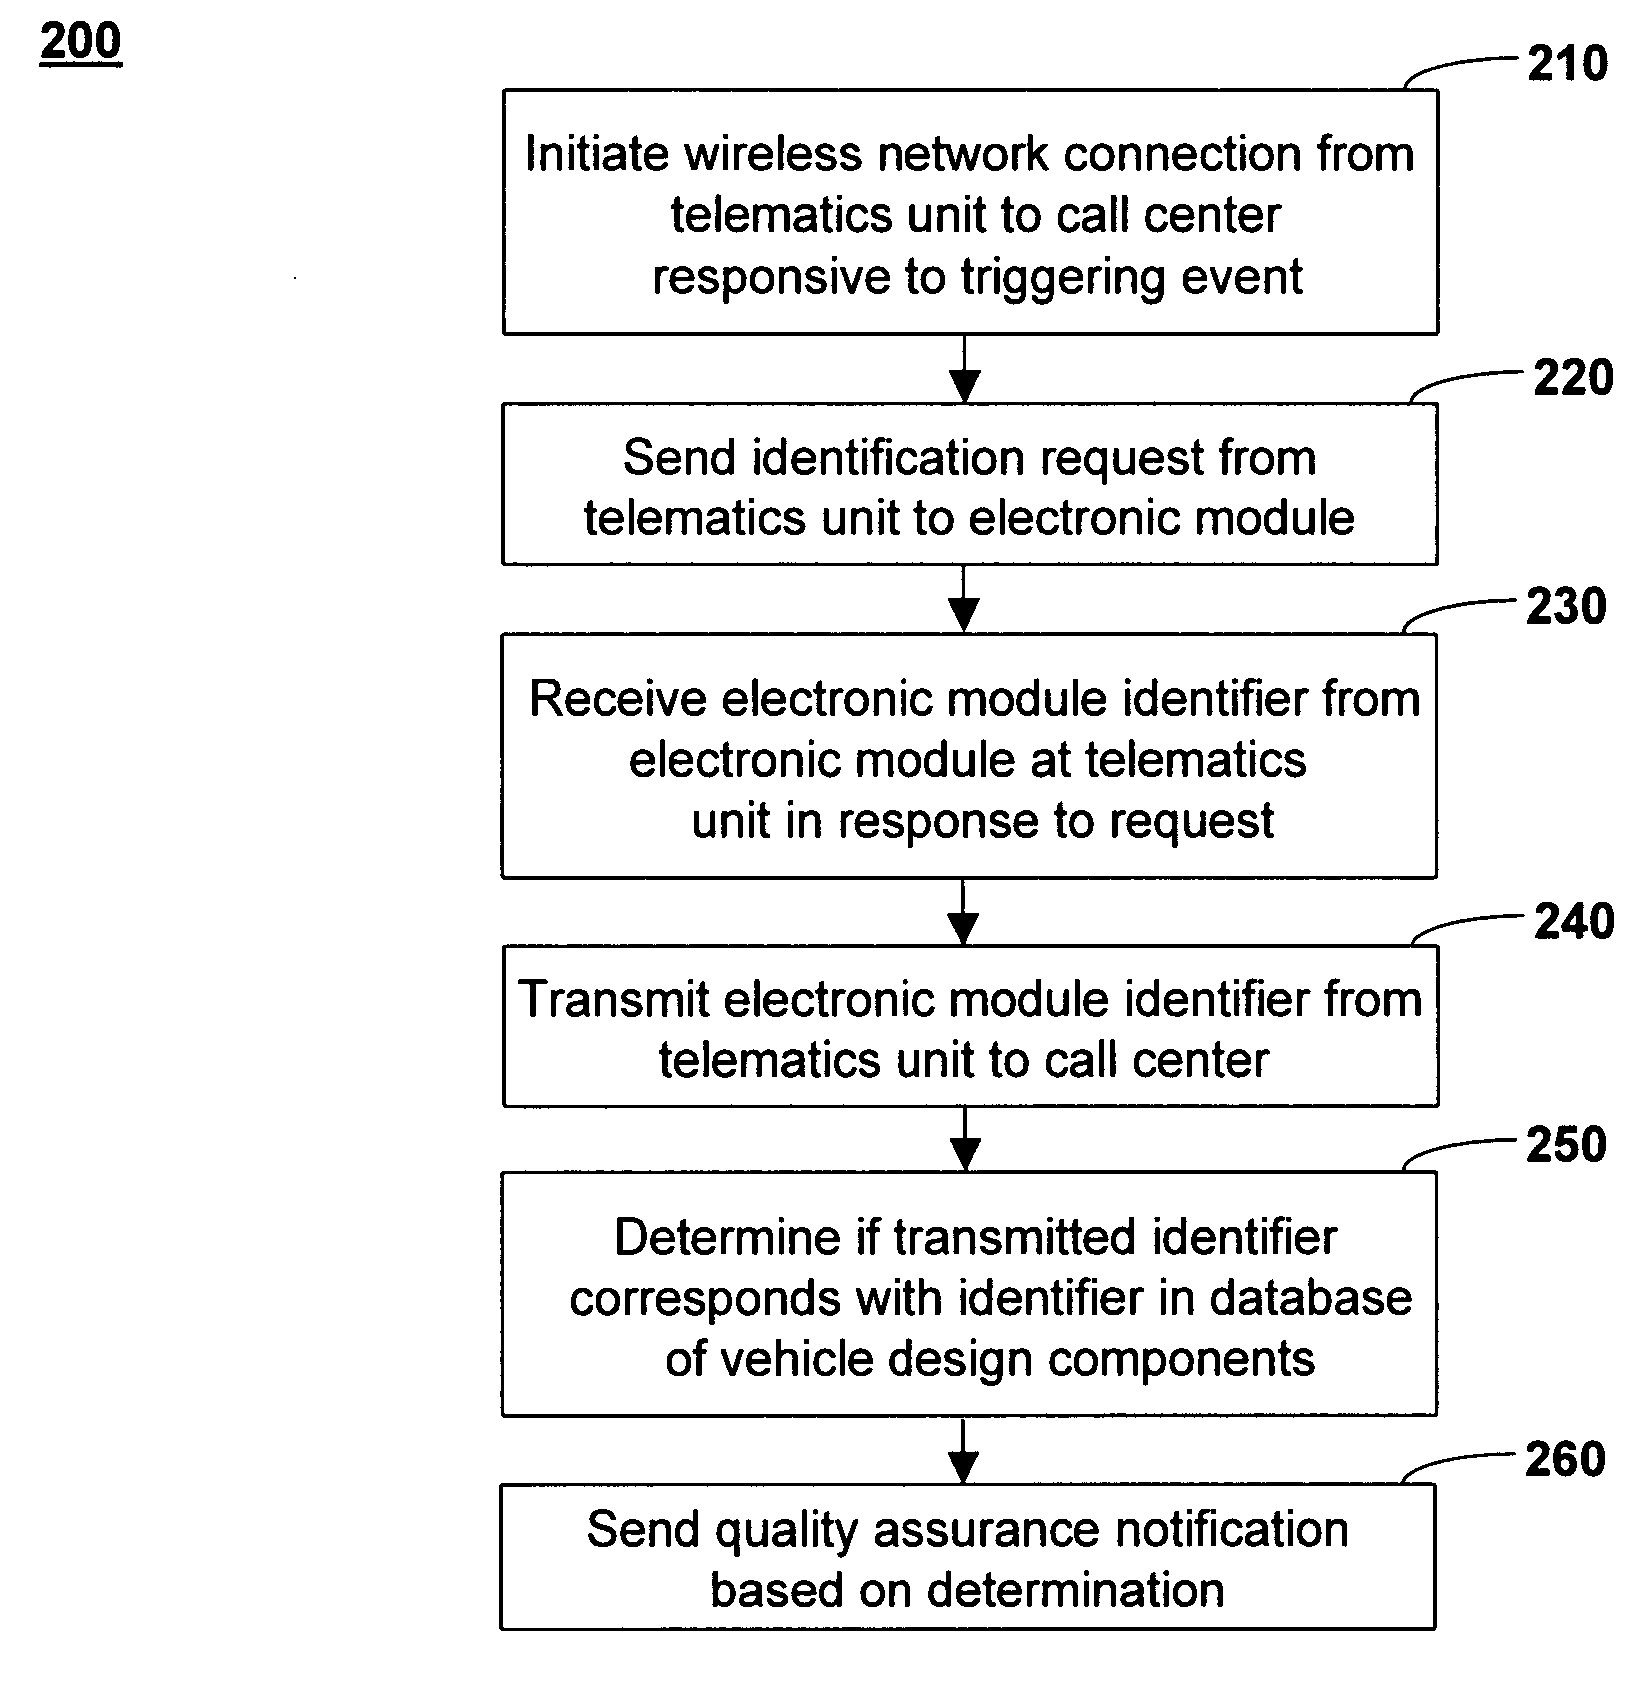 Method and system for remotely inventorying electronic modules installed in a vehicle